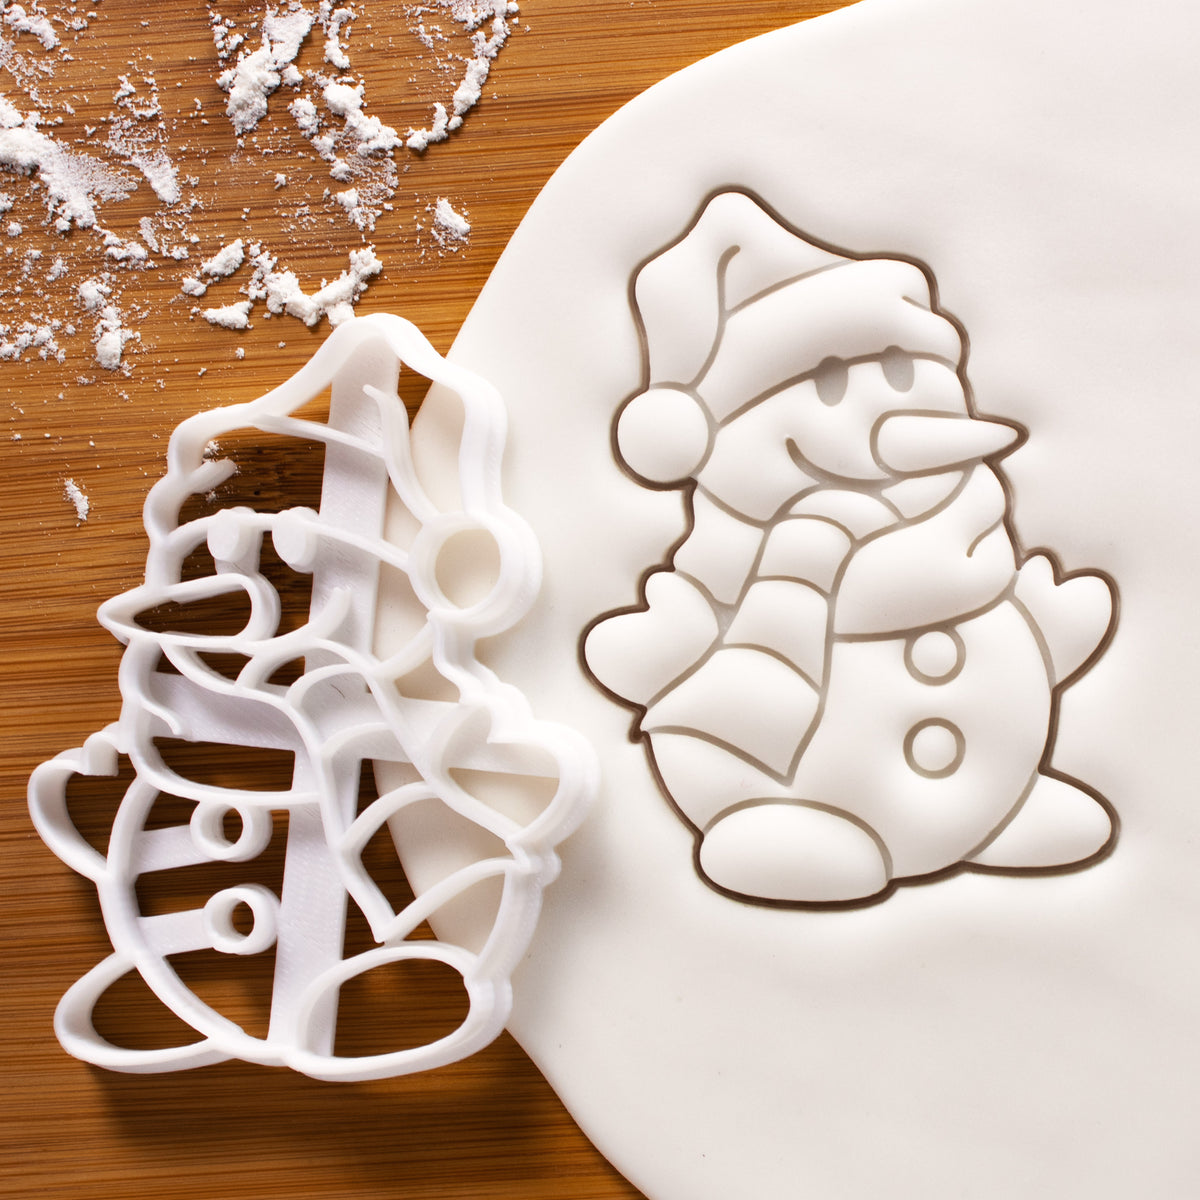 Snowman cookie cutter pressed on white fondant